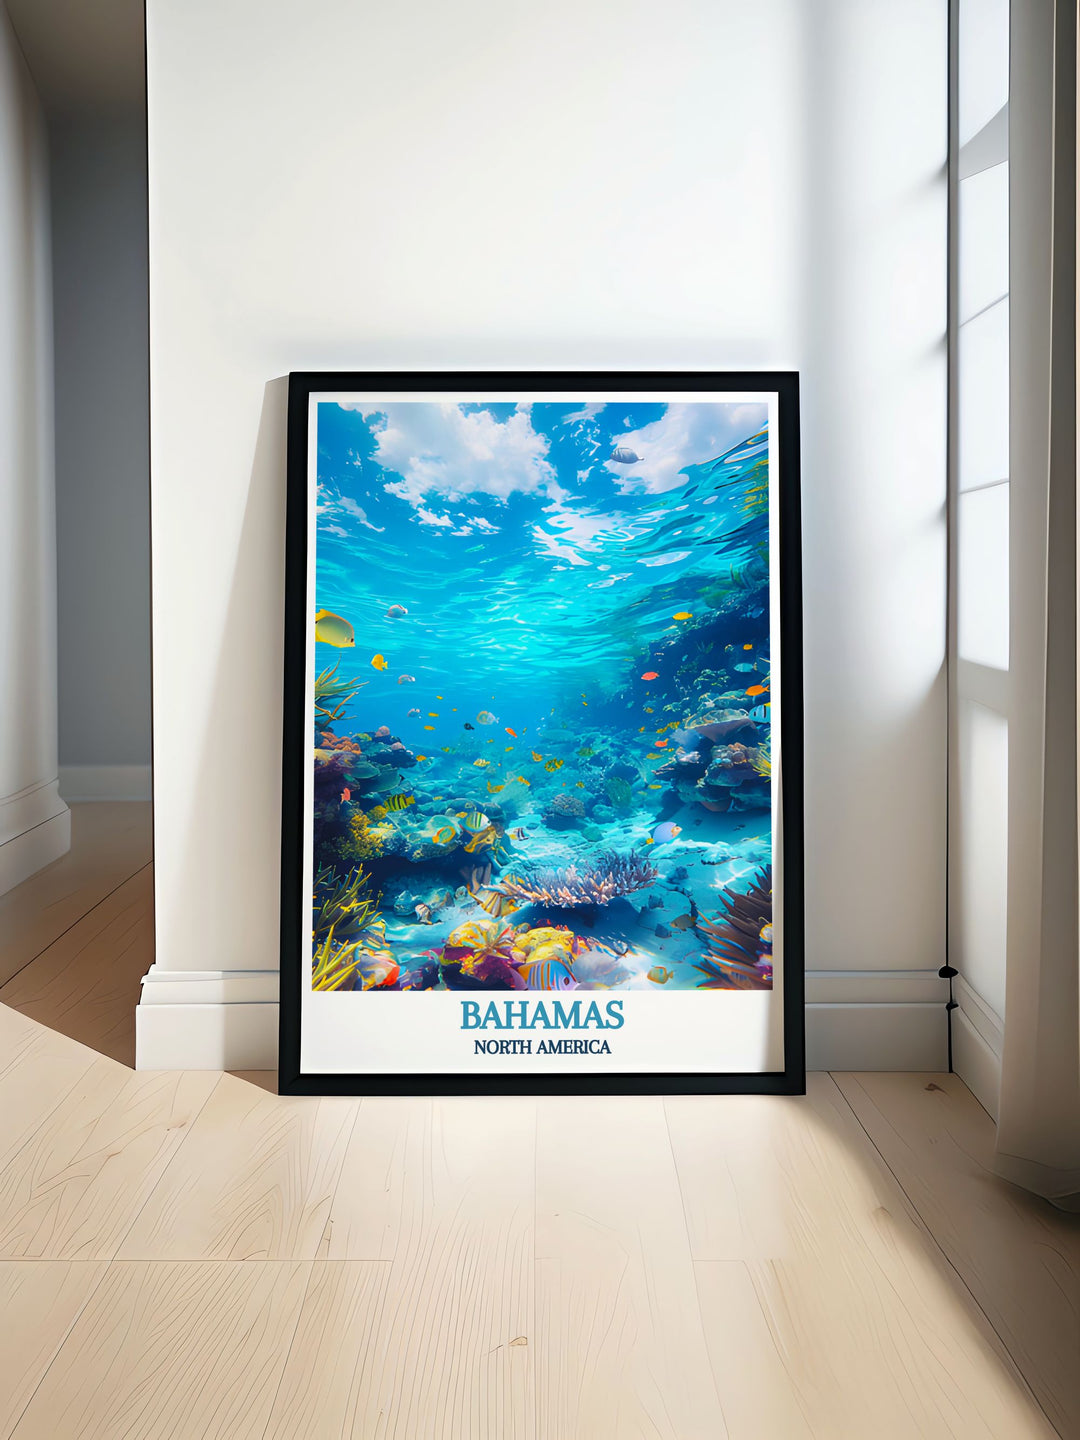 Wall art featuring the serene waters of Exuma Cays Land and Sea Park, perfectly capturing the vivid underwater ecosystem and vibrant coral reefs of the Bahamas.